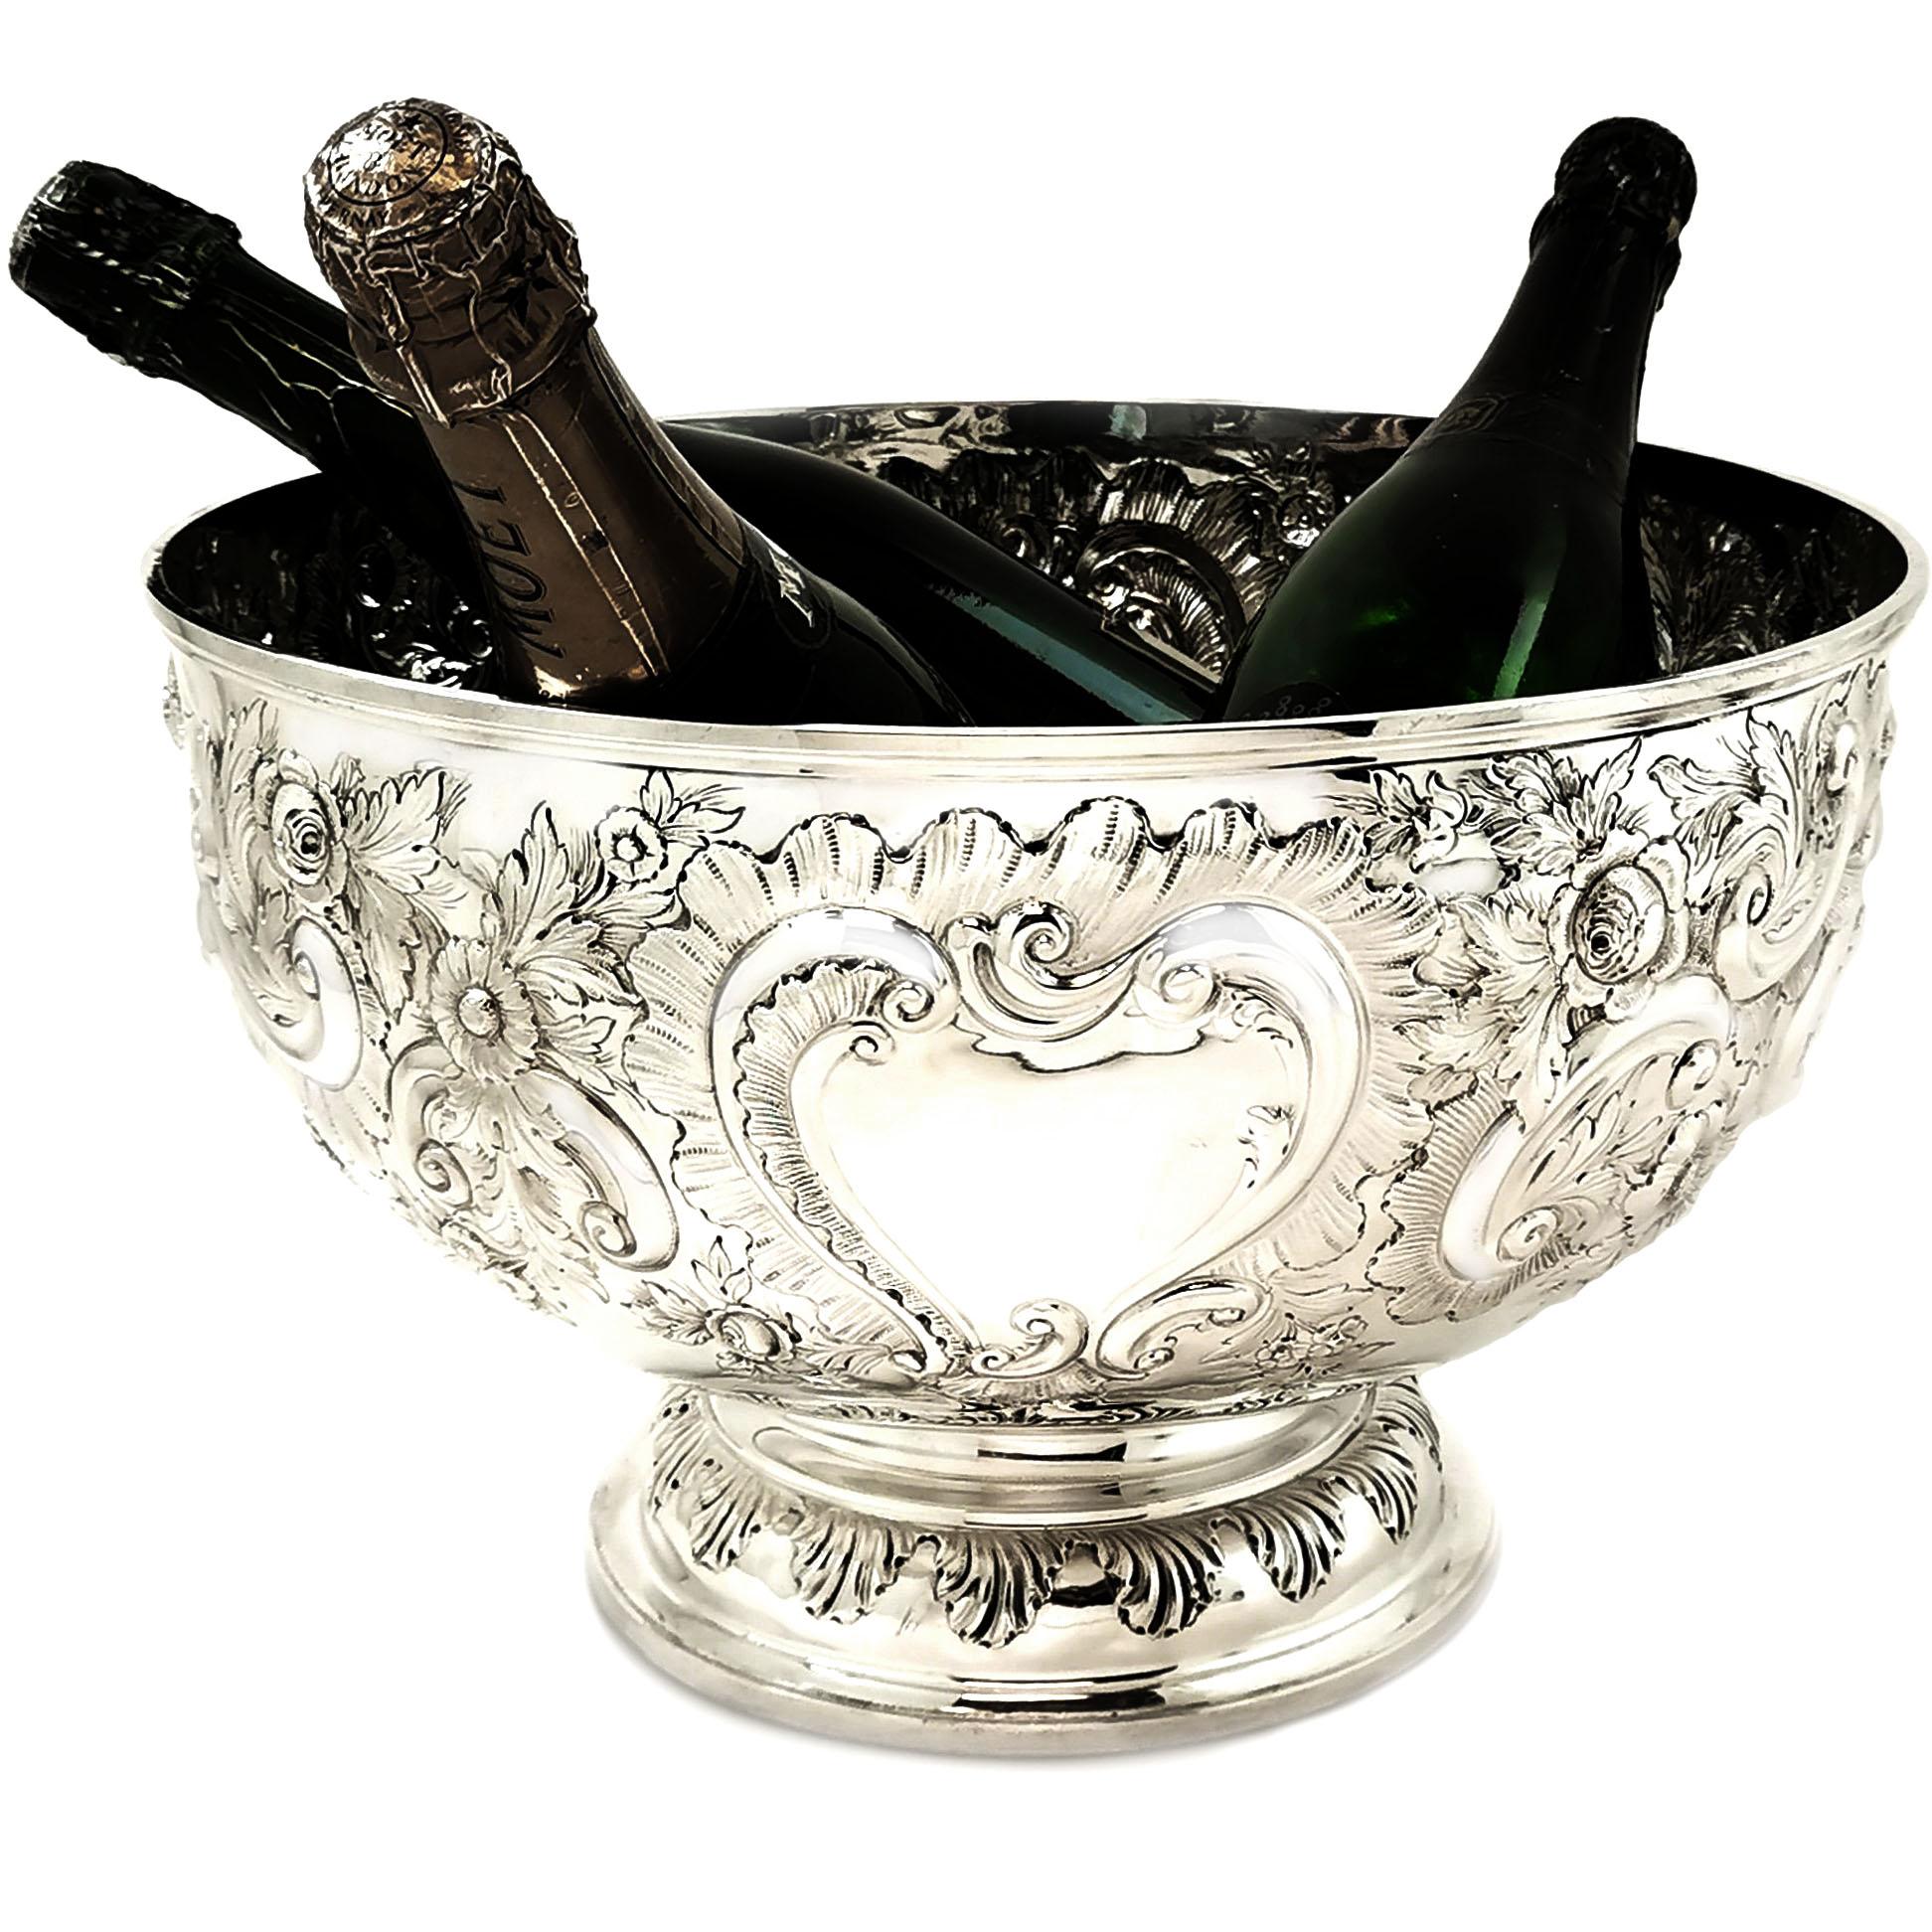 A magnificent Antique Victorian solid Silver Bowl decorated with an ornate chased floral, scroll and foliate design around a pair of blank cartouches. This Bowl is of notably large size and is an impressive display piece and is large enough as a